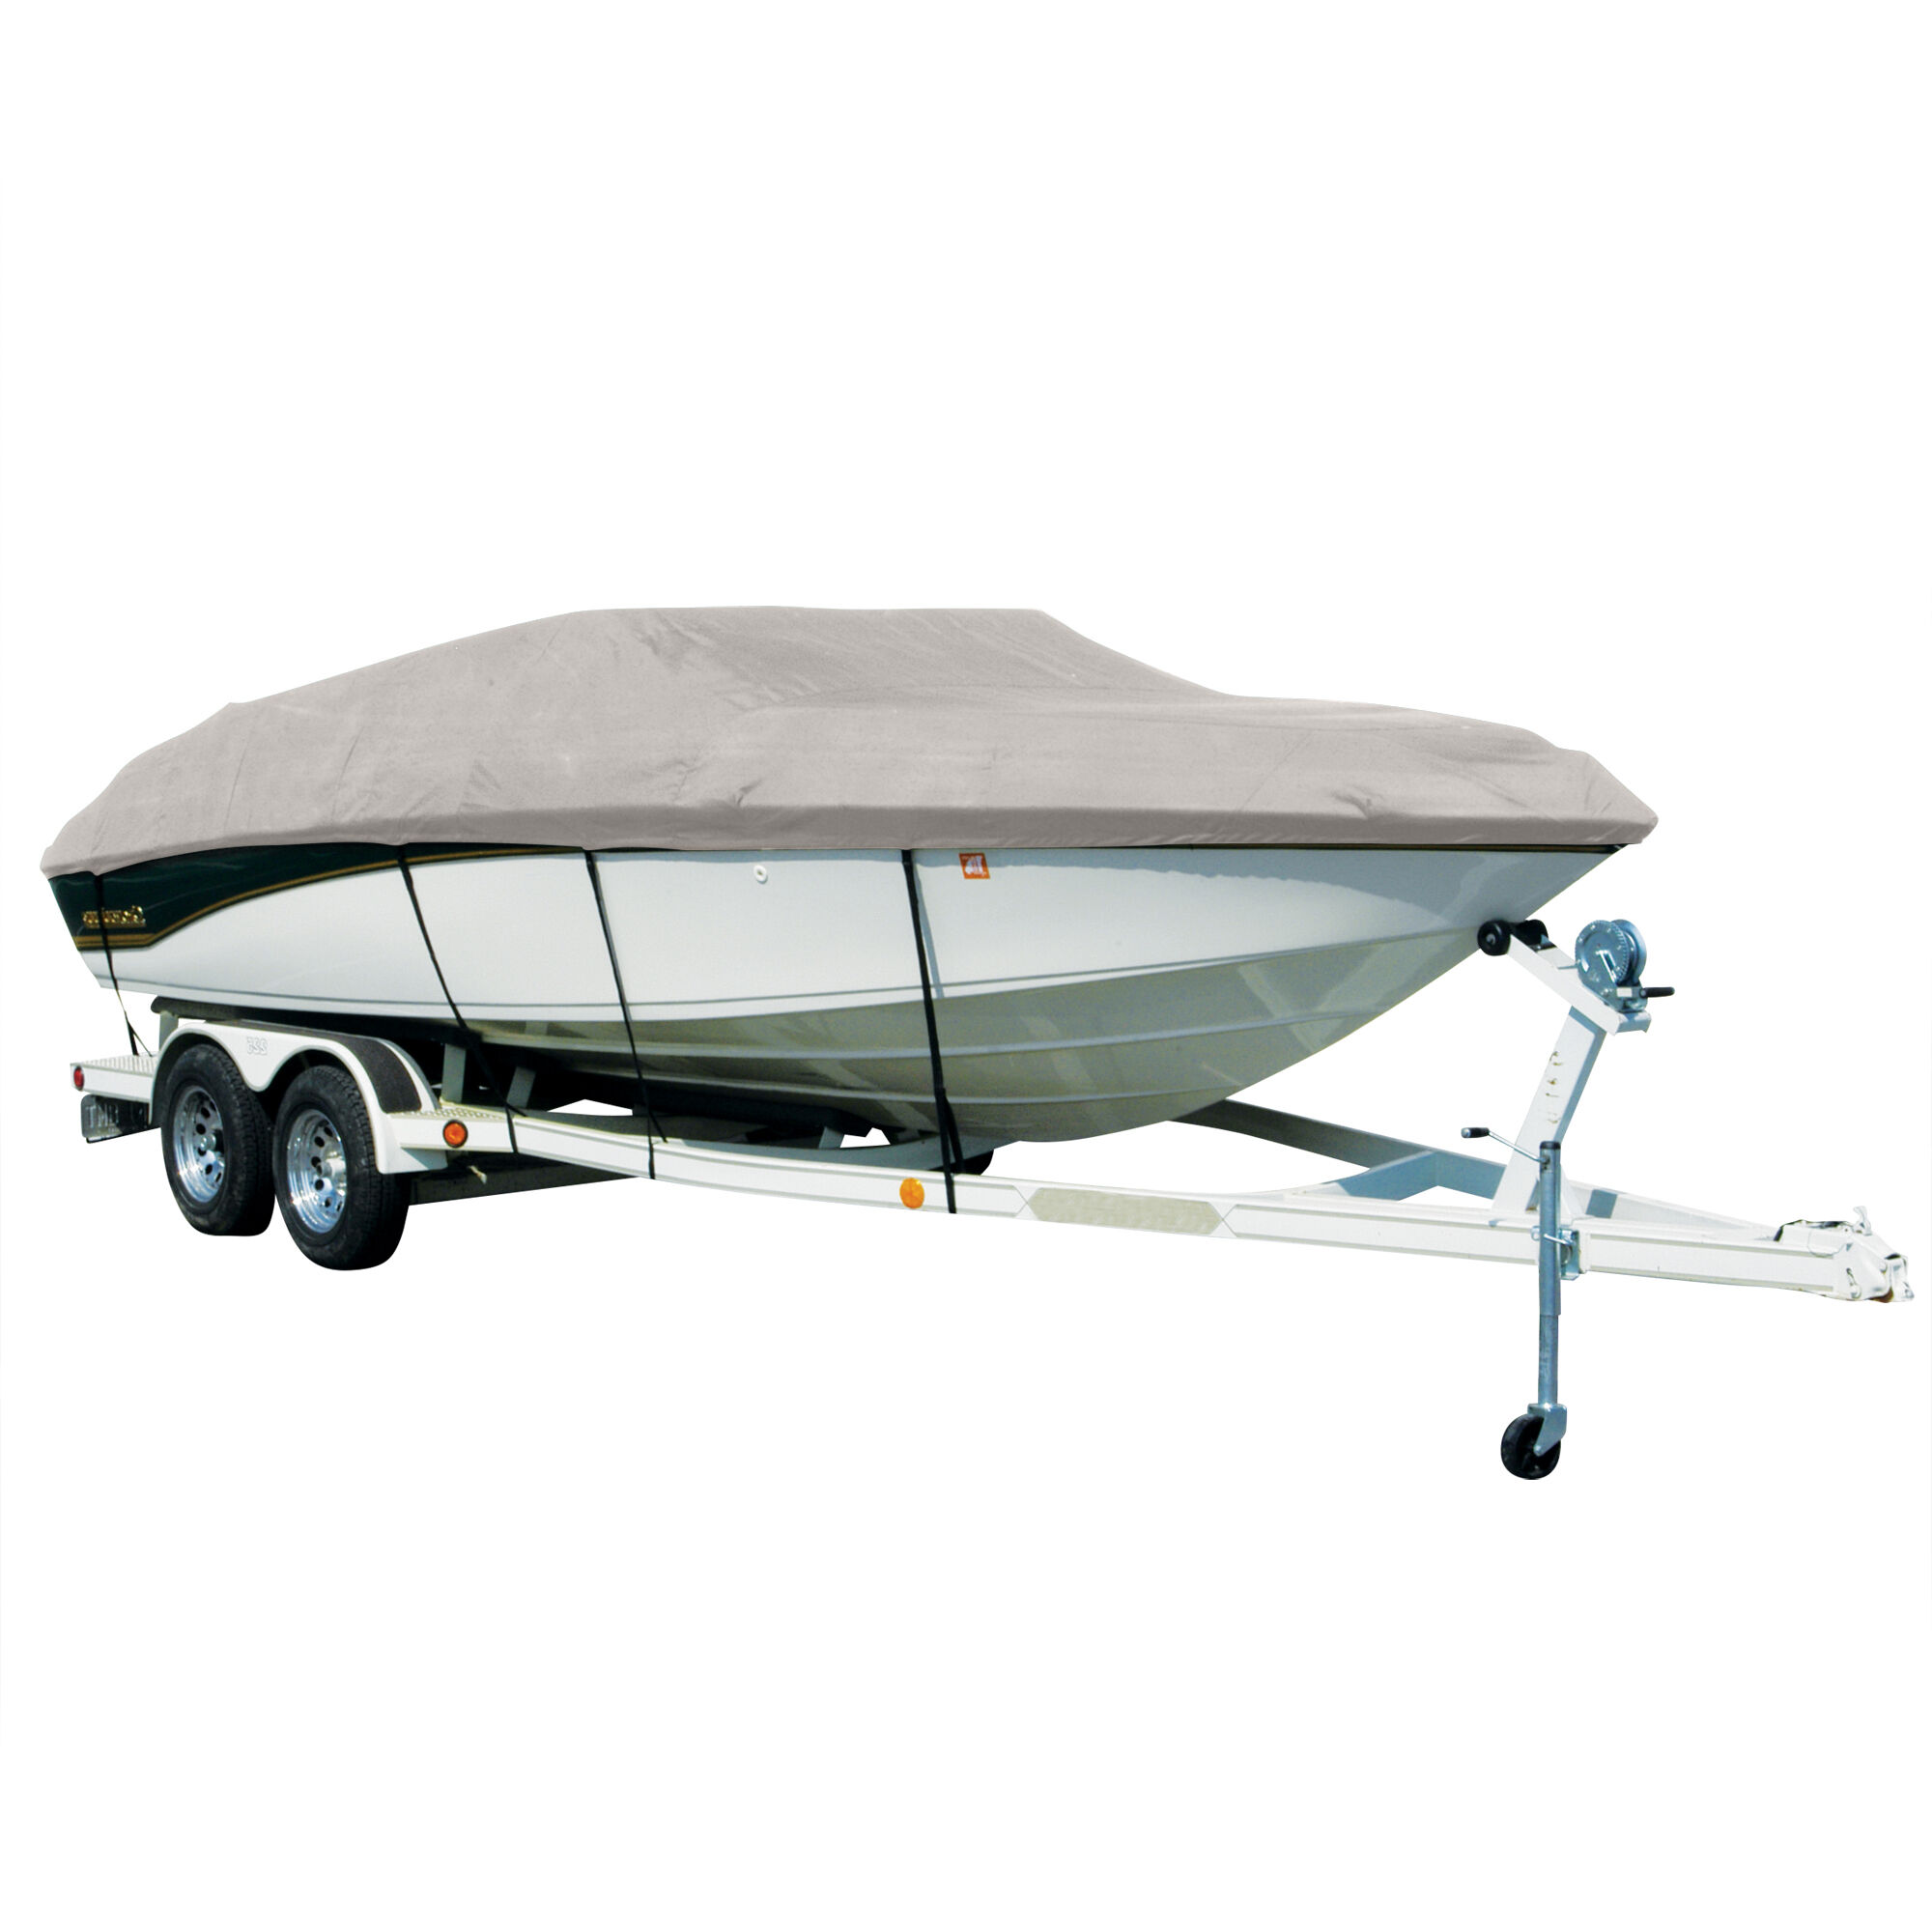 Covermate Sharkskin Plus Exact-Fit Cover for Campion Chase 910 Zri Chase 910 Zri Cc I/O. Silver Boat Cover Polyester